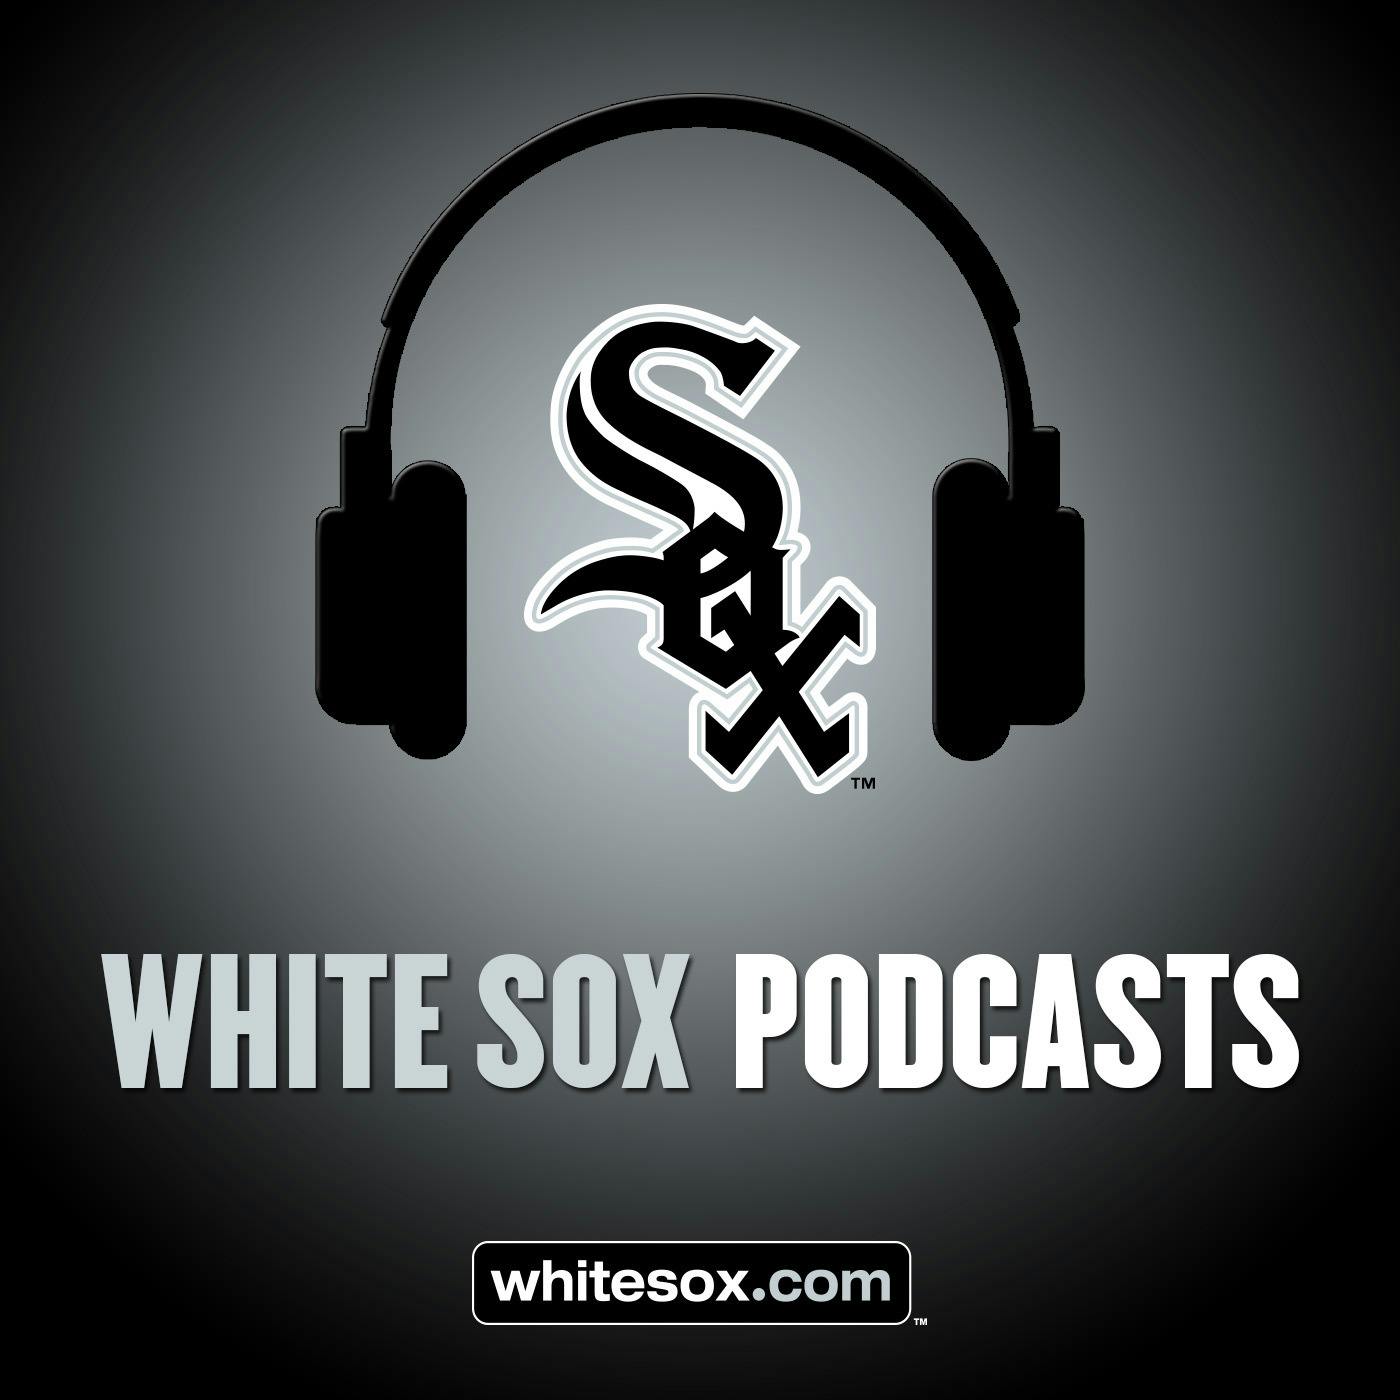 1/21/18: White Sox Weekly